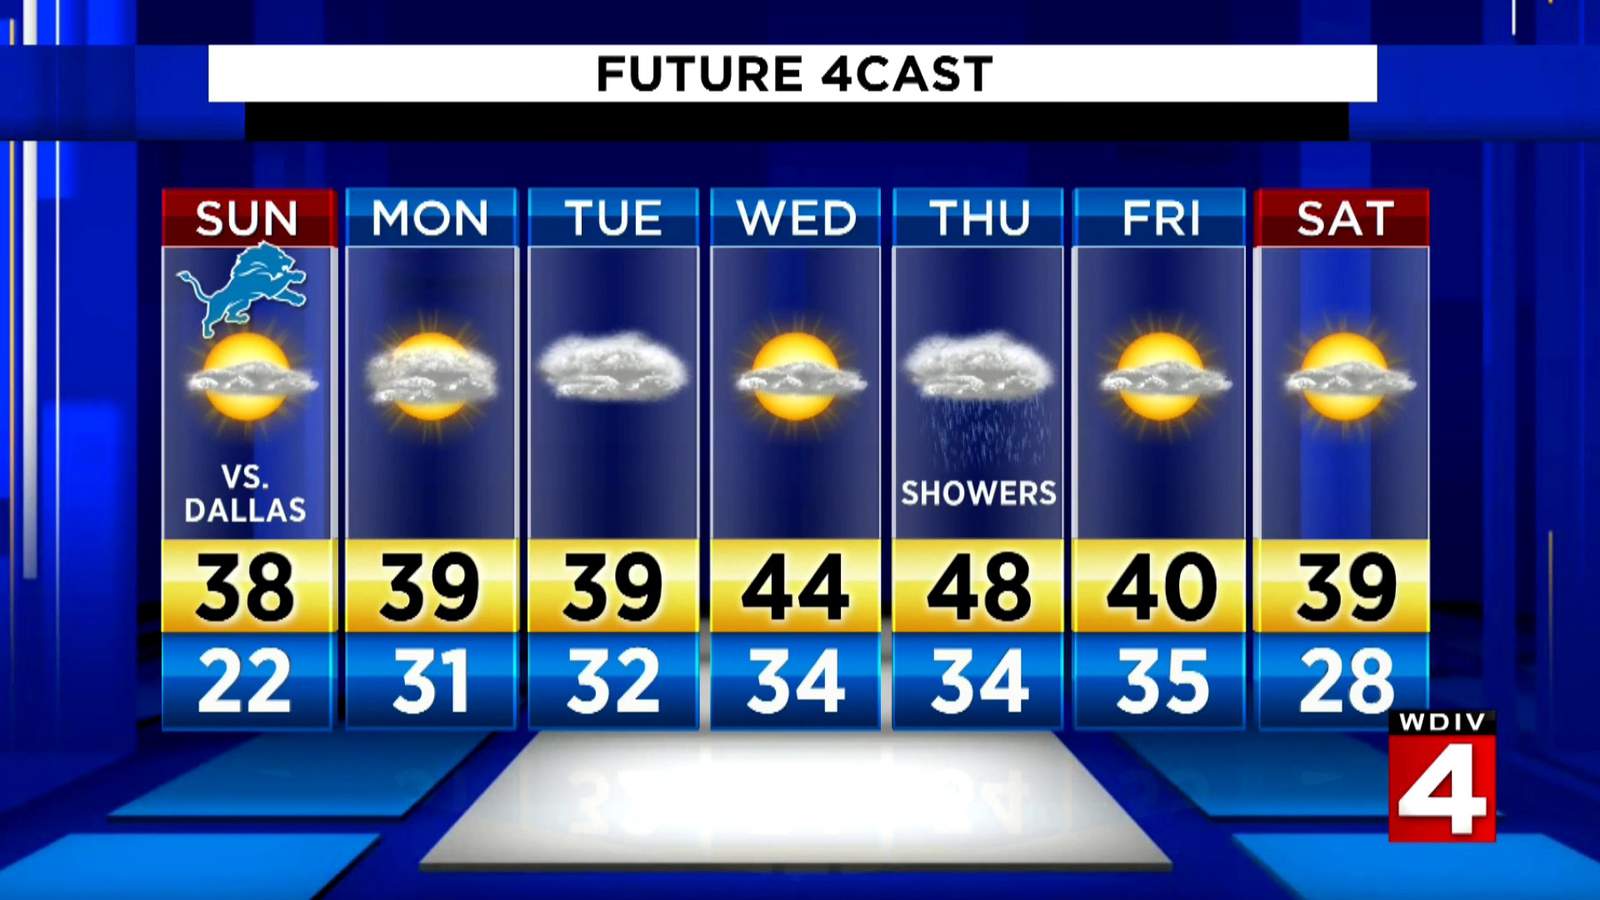 Metro Detroit weather: Cloudy, Not As Cold Sunday Night